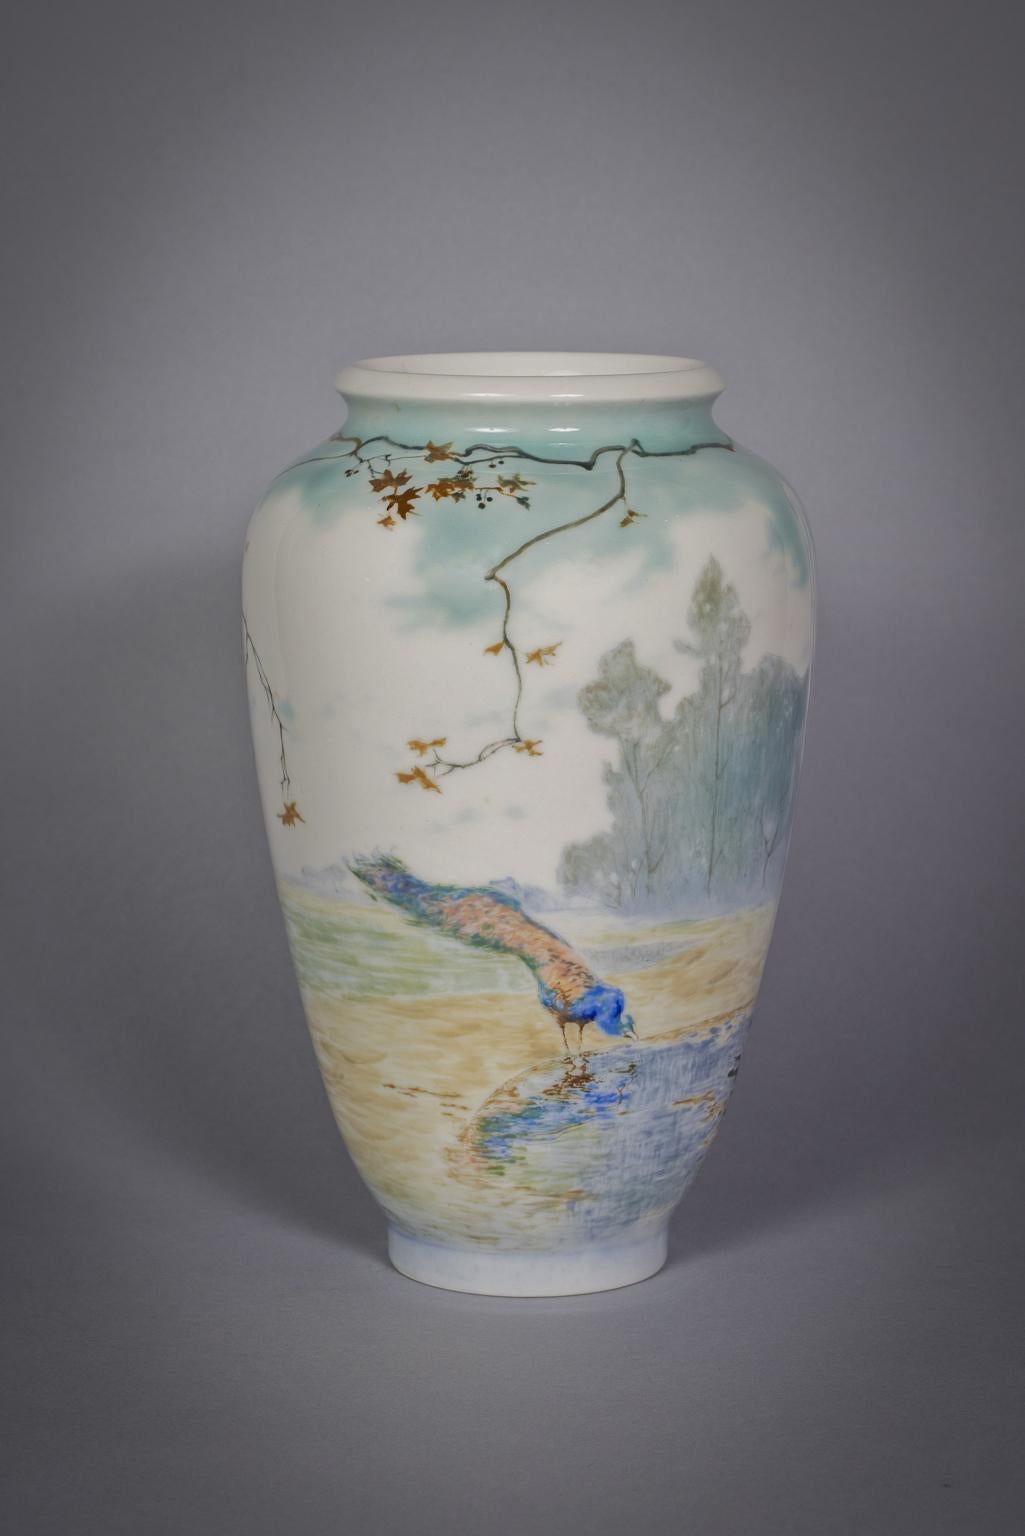 Rare Sevres Porcelain Pate-Sure-Pate Art Nouveau Vase, Dated 1911 In Good Condition For Sale In New York, NY